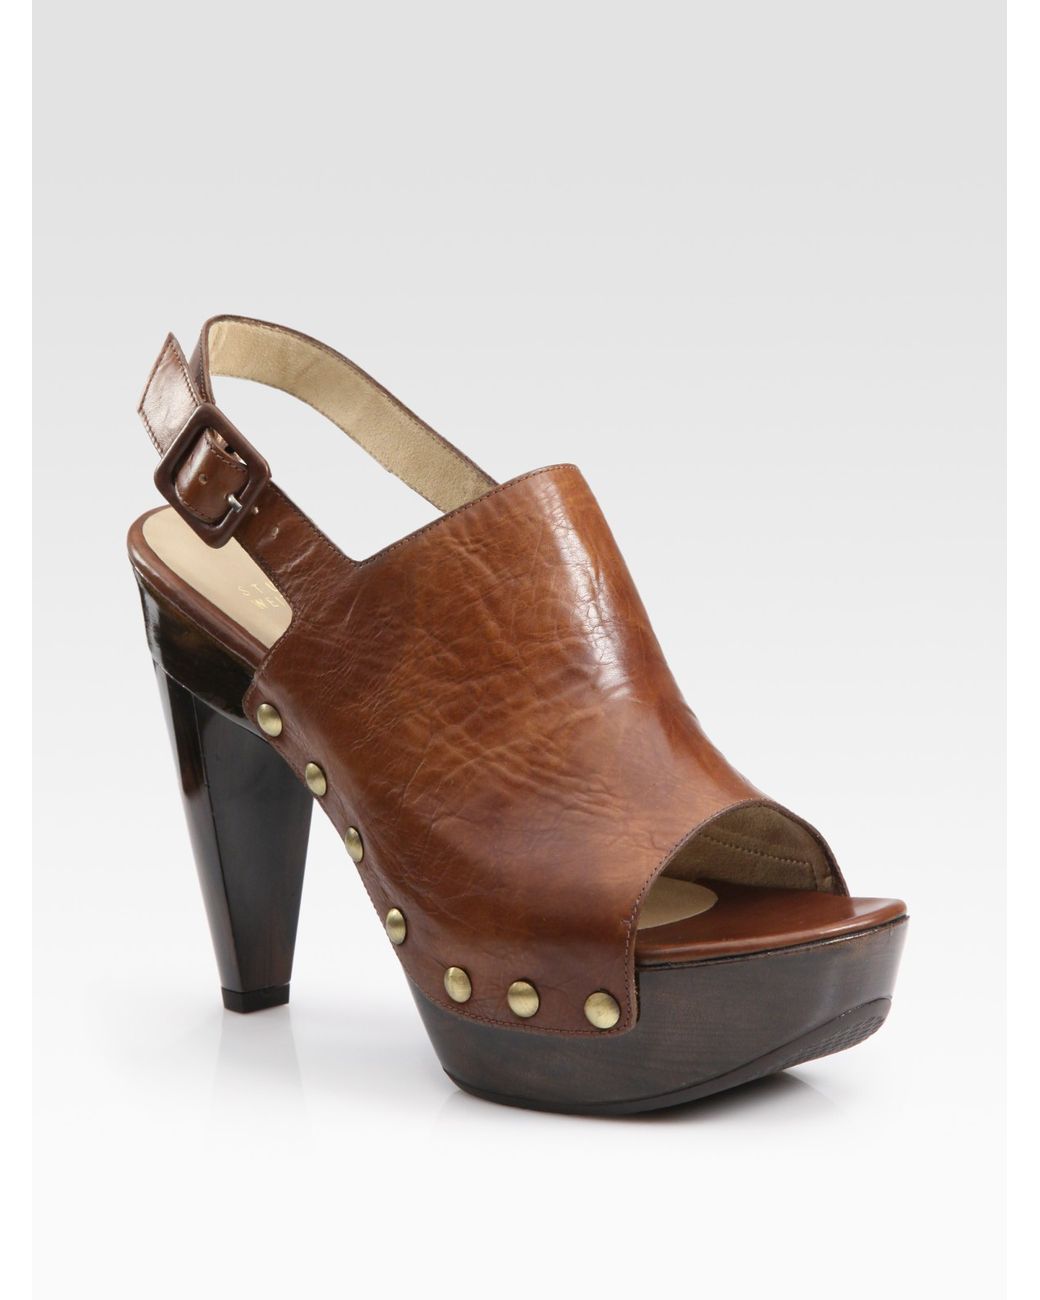 Stuart Weitzman Bold Leather and Wooden Peep Toe Clogs in Brown | Lyst